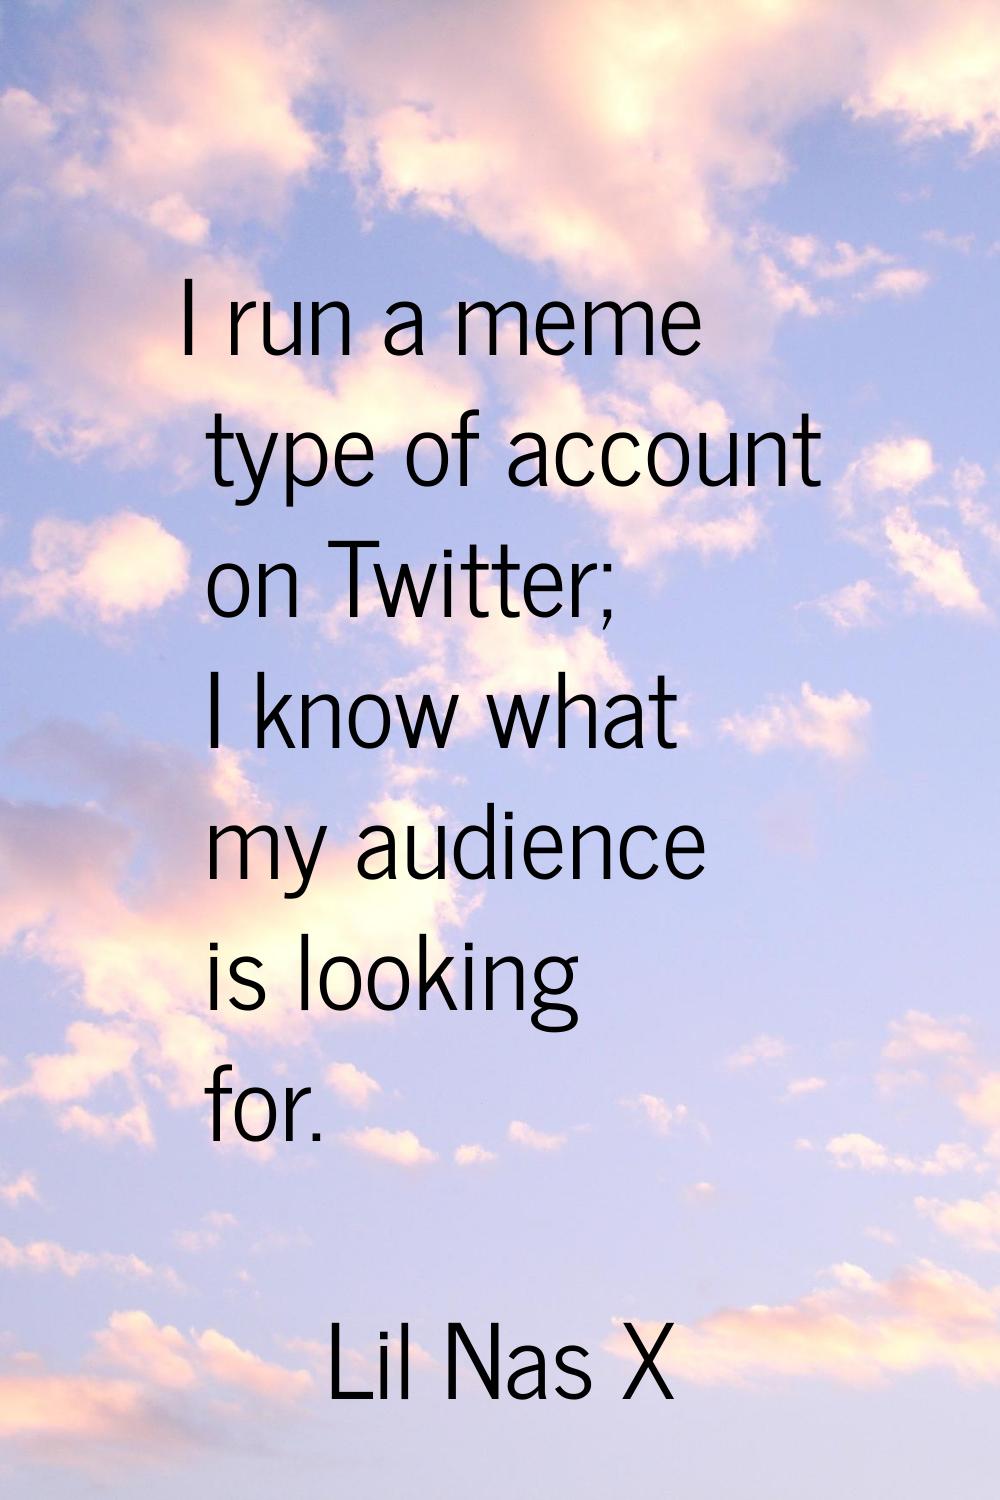 I run a meme type of account on Twitter; I know what my audience is looking for.